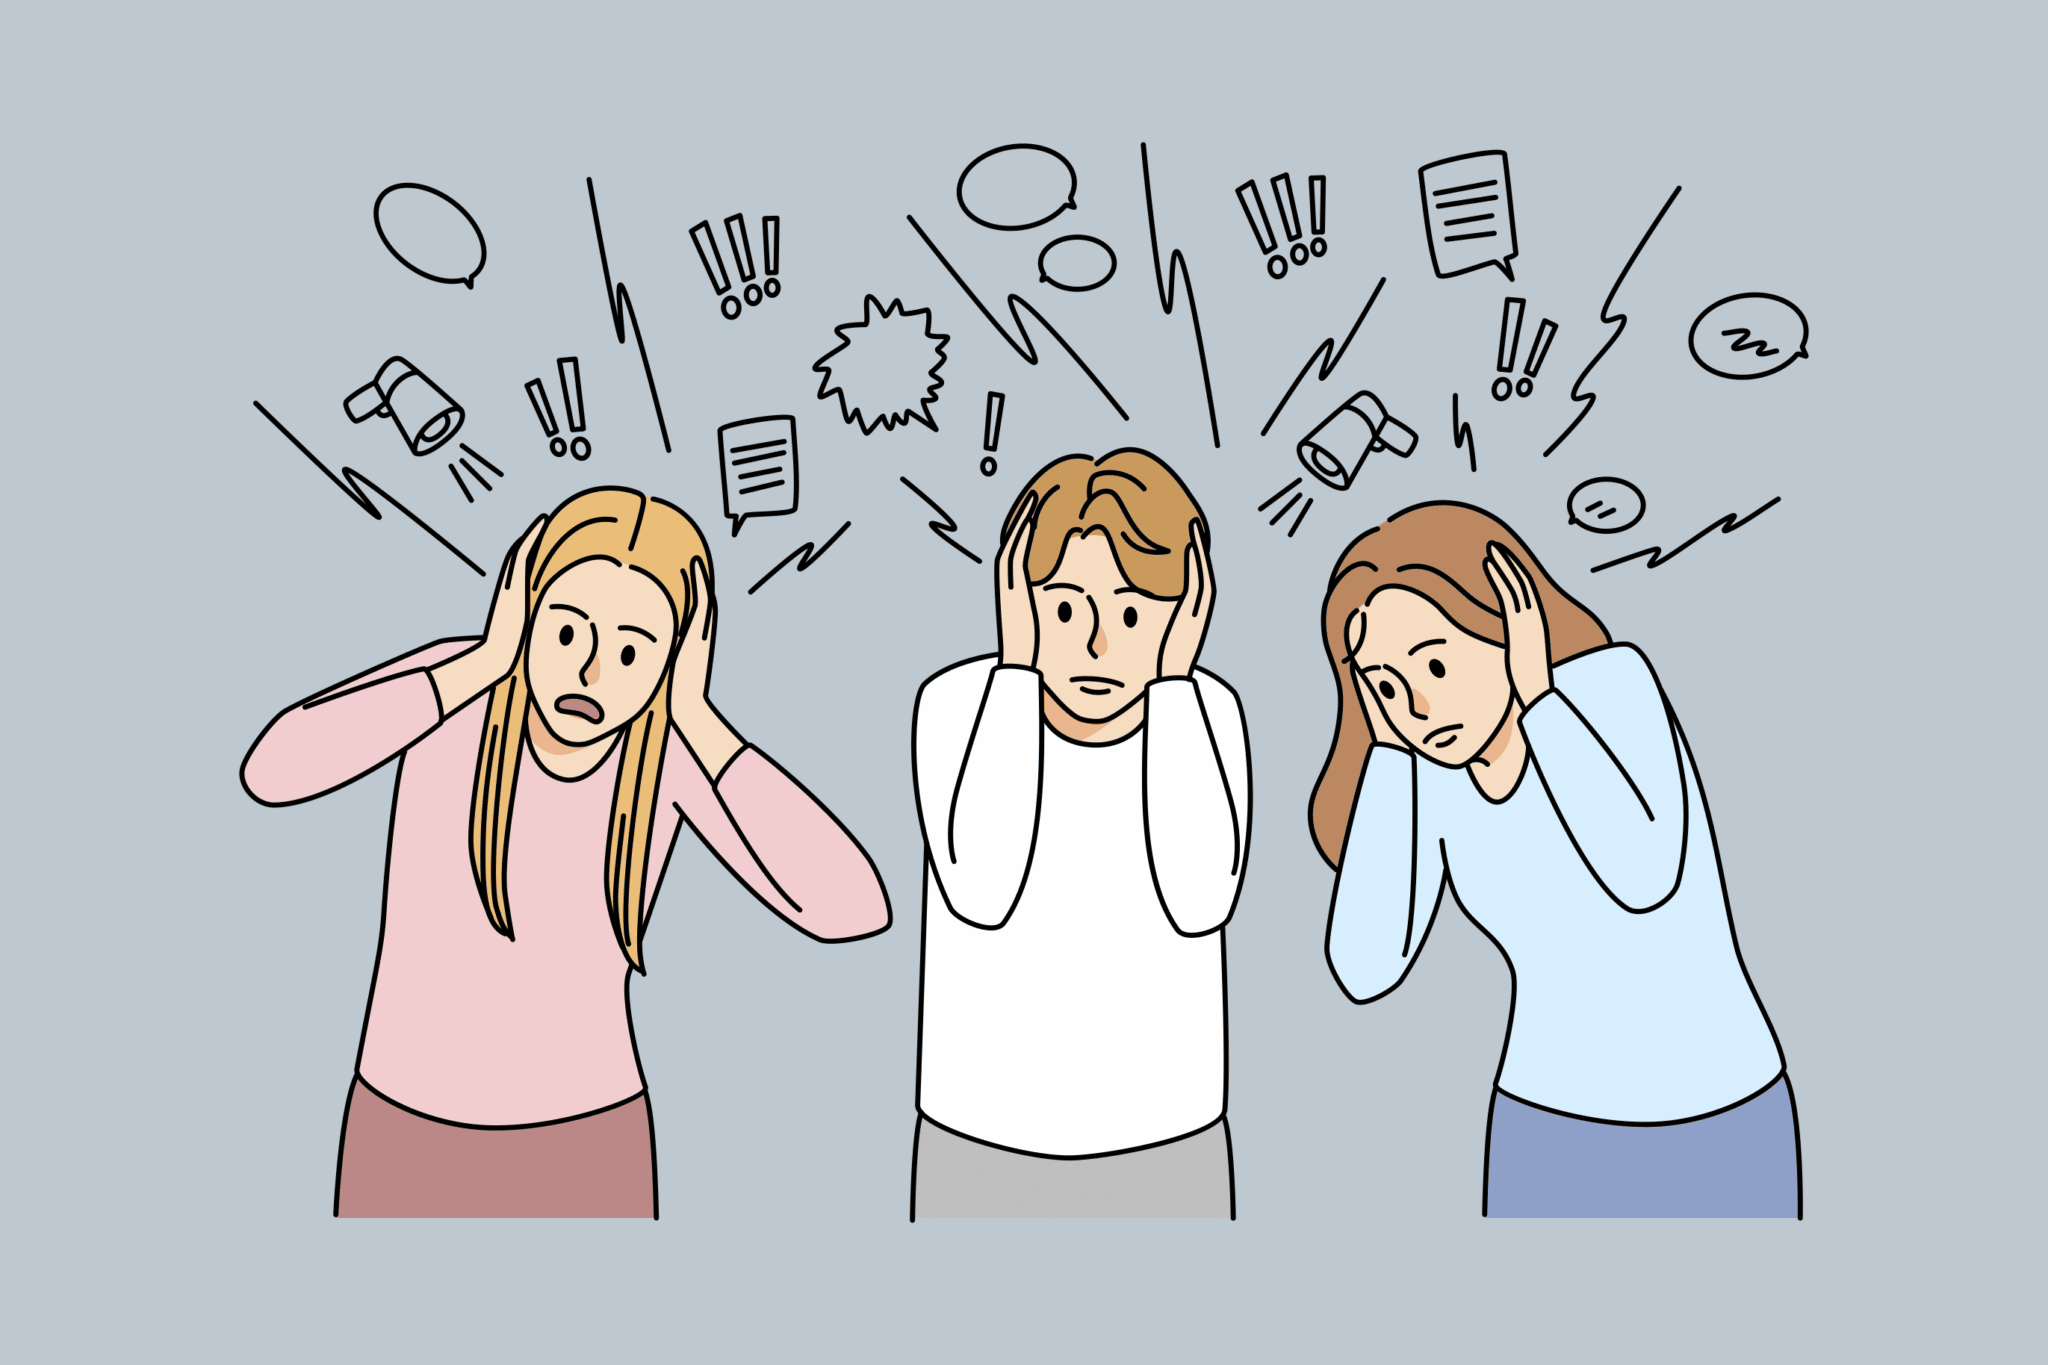 employees covering ears from noises and notifications, modern knowledge workers bombarded with notifications, how to regain focus and productivity